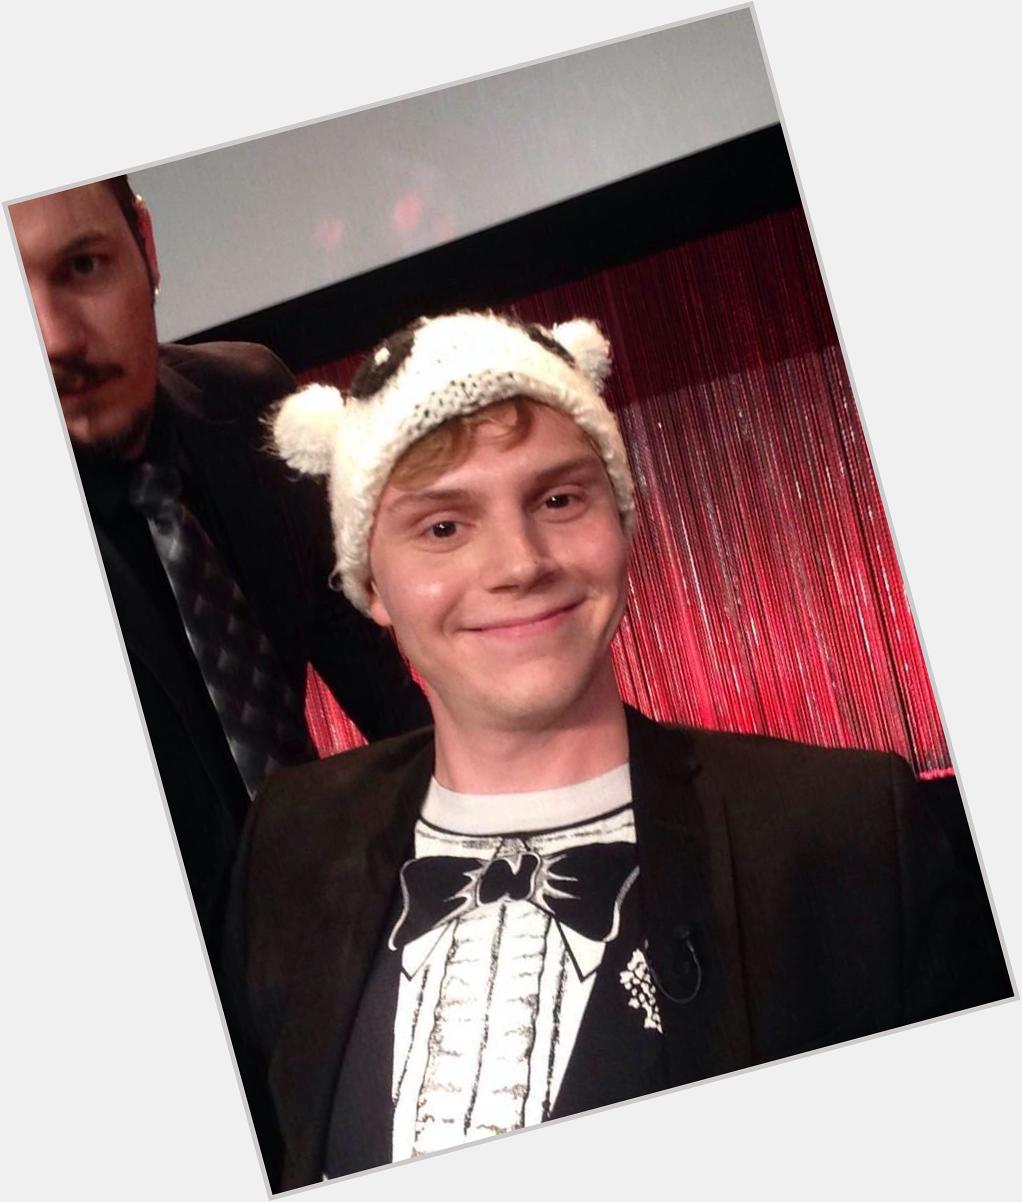 HAPPY BIRTHDAY EVAN PETERS, thank the Lord you was born bcos u r the cutest?¿ 